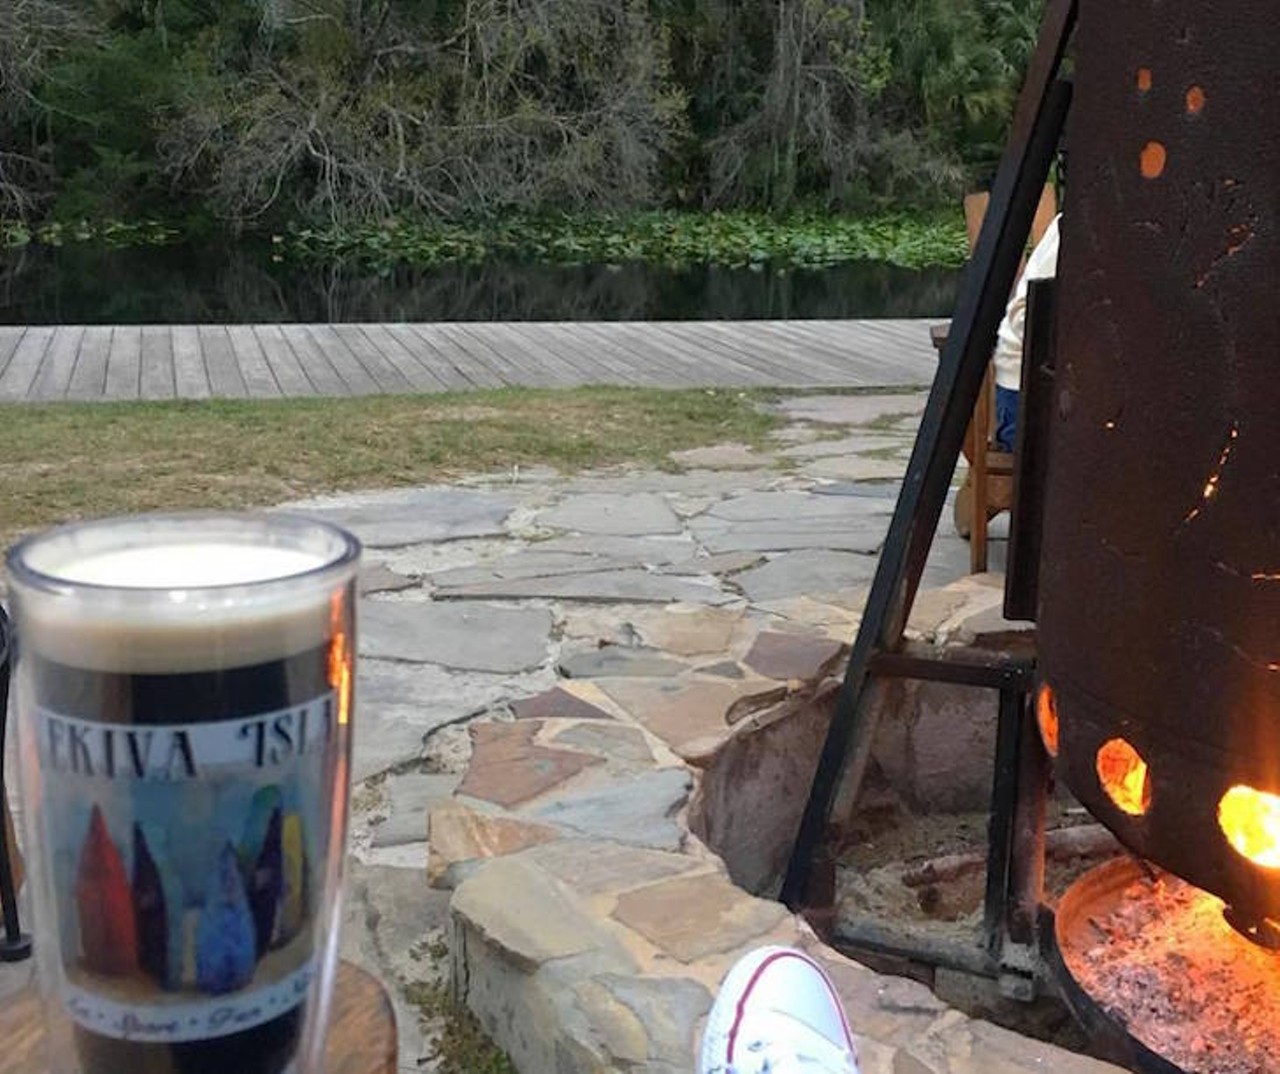 Check out Fire Pit Fridays at Wekiva Island
Enjoy chillier nights with a dinner cooked over an open fire pit at Wekiva island. Each Friday&#146;s meal and live music is different, so you can make it a weekly happening without getting sick of it. Dinners are served from 5 p.m. and end when the food is gone. Just pay a fixed price and get your grub on.
Photo via Wekiva Island/Facebook